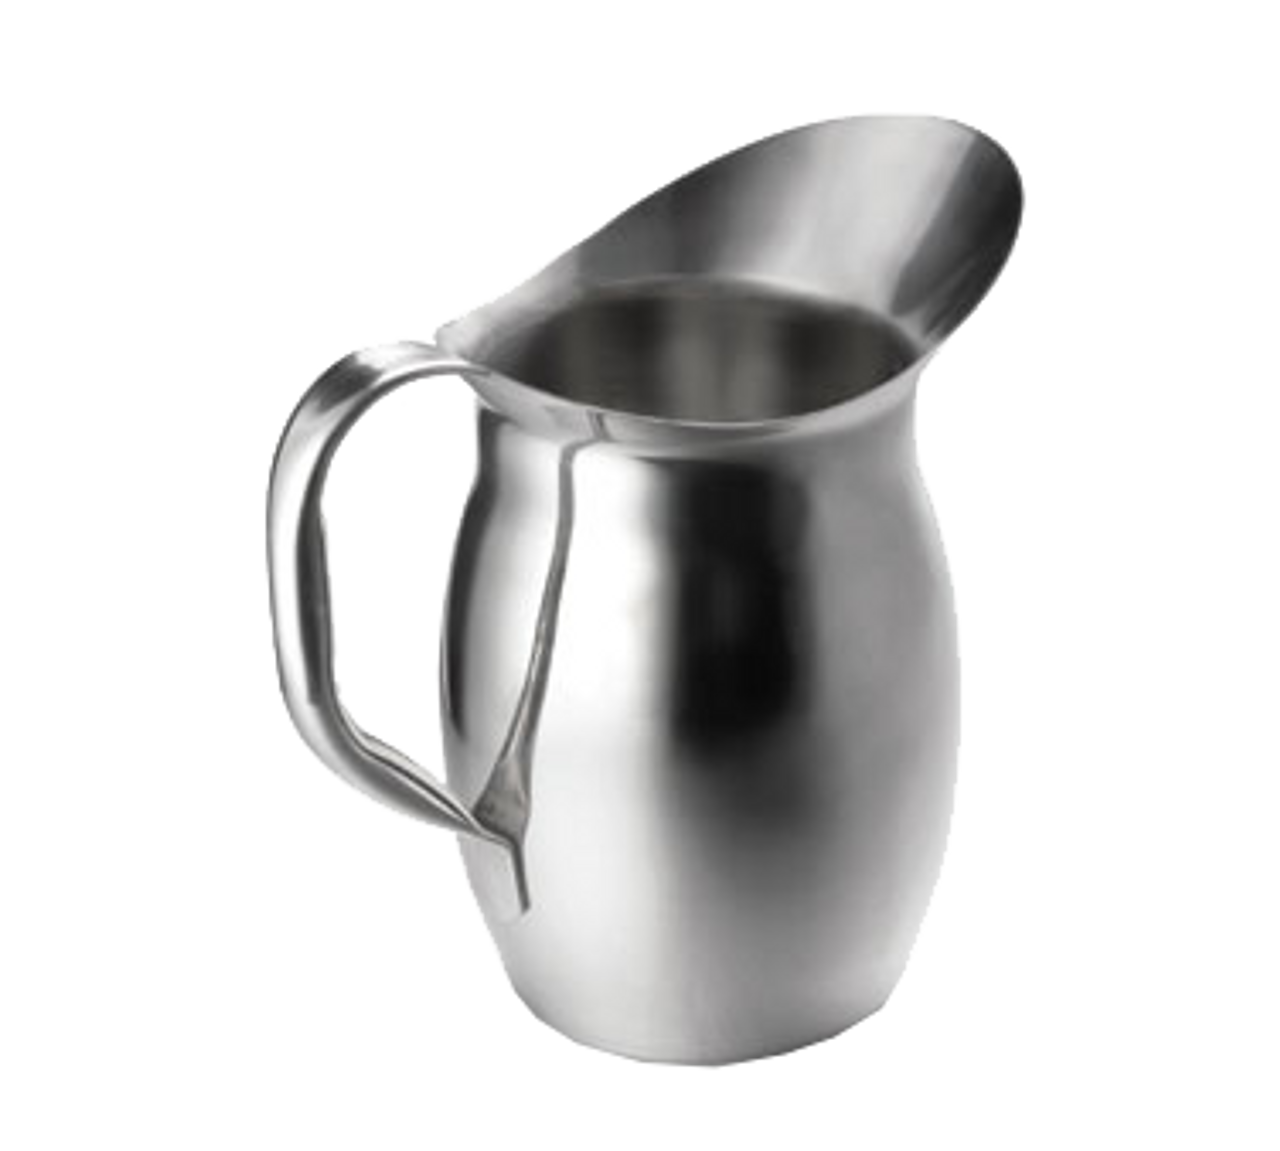 https://cdn11.bigcommerce.com/s-g3i86bef61/images/stencil/1280x1280/products/3094/3288/Tablecraft-202-Bell-Metal-Pitcher__11780.1665696526.png?c=1